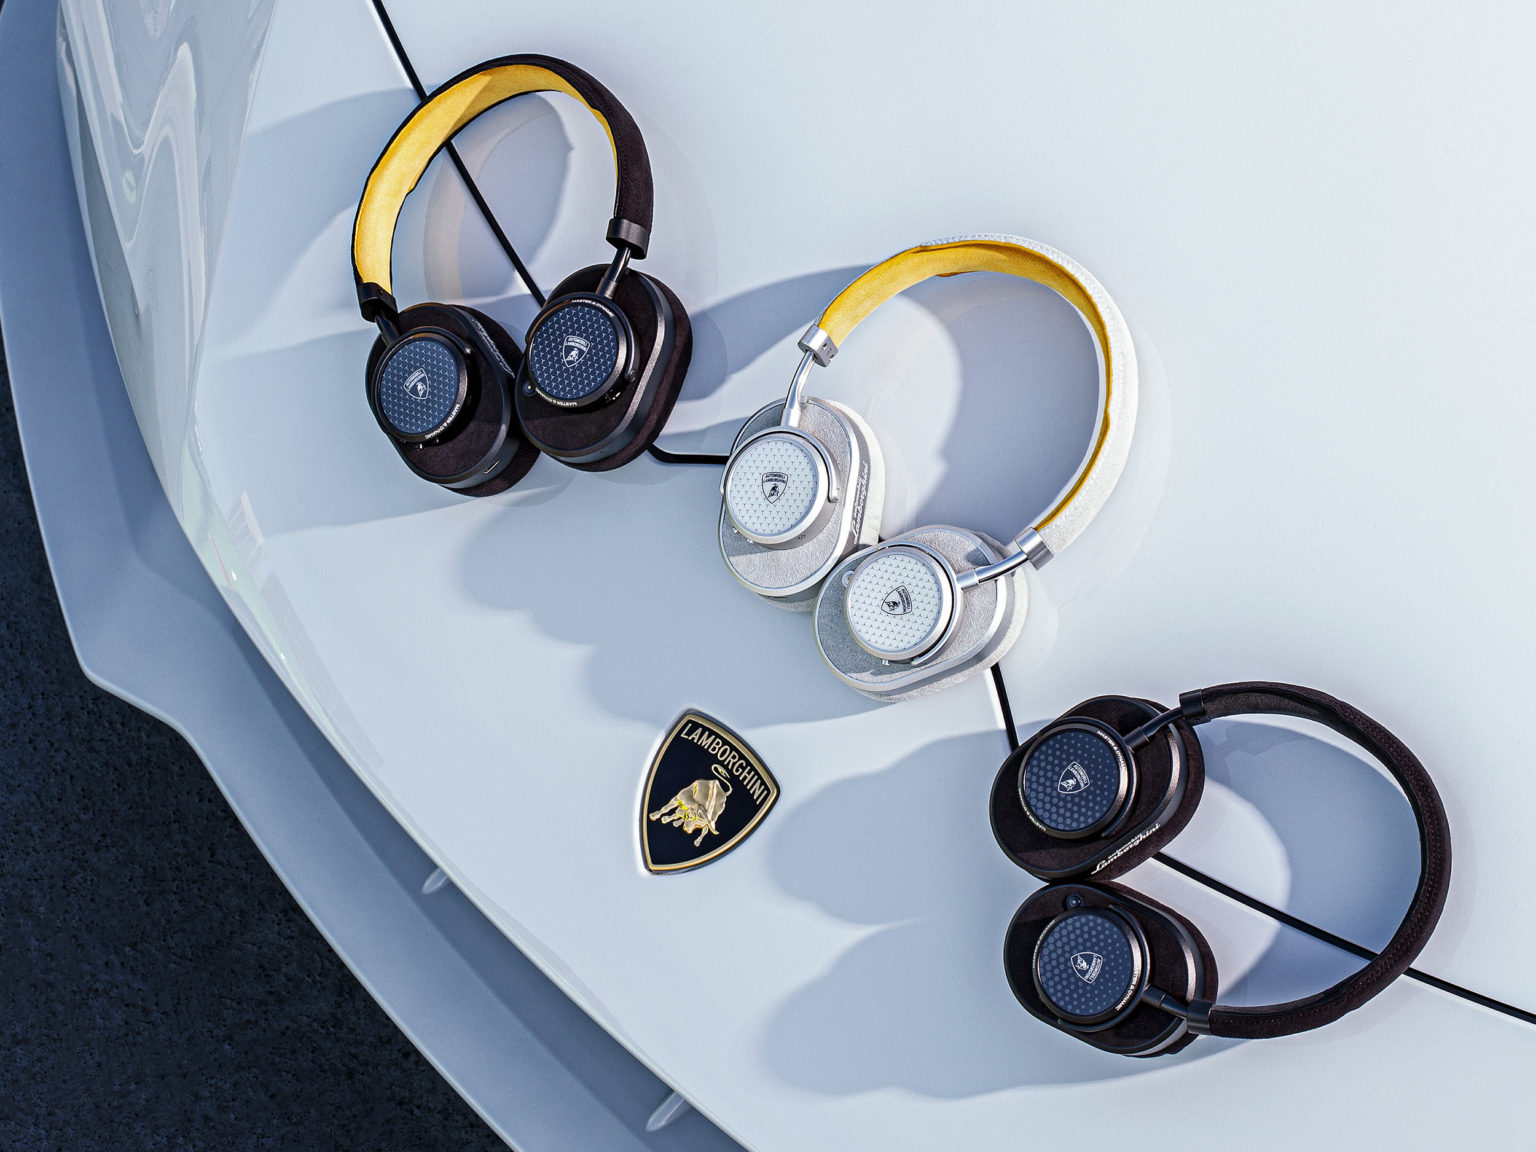 The headphones and earphones carry many of the same signature style elements as Lamborghini vehicles.